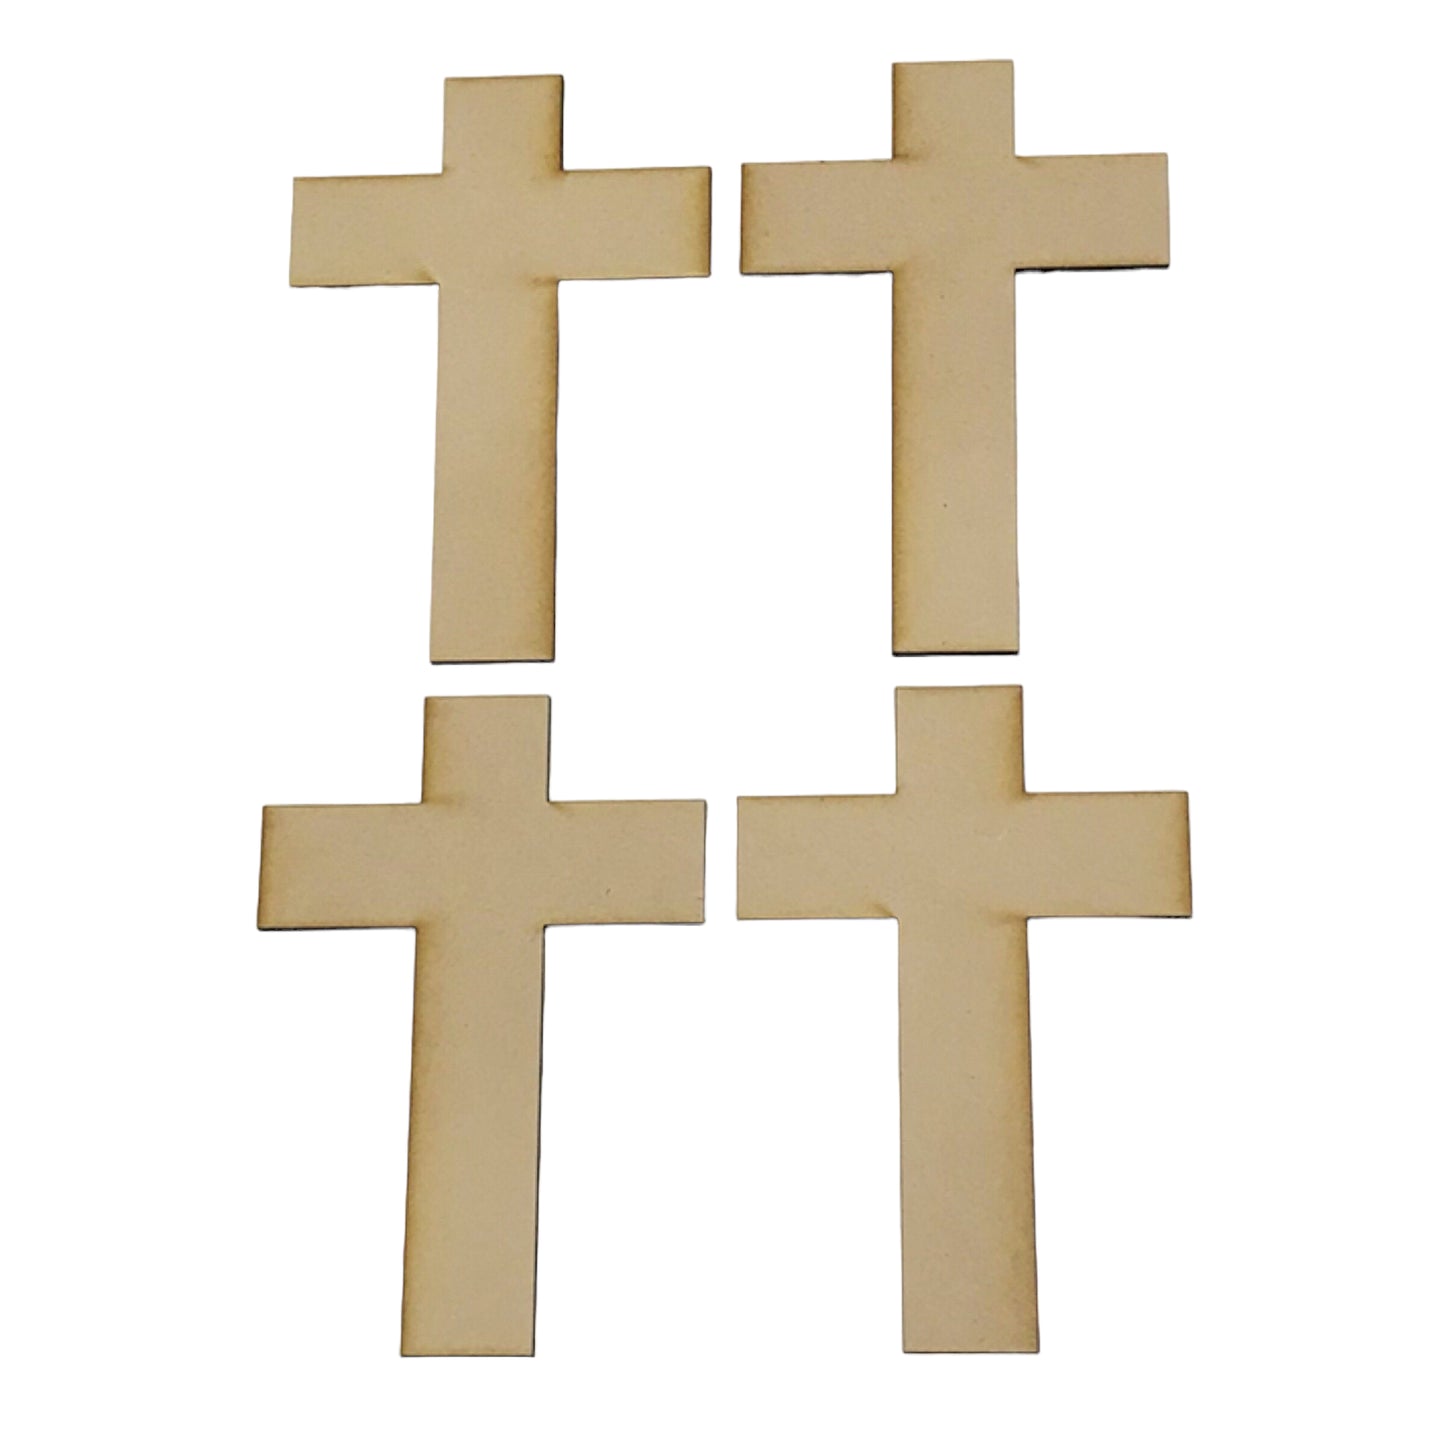 Set of 4 Cross Crosses 3mm MDF Shape Raw Cut Out Art - The Renmy Store Homewares & Gifts 